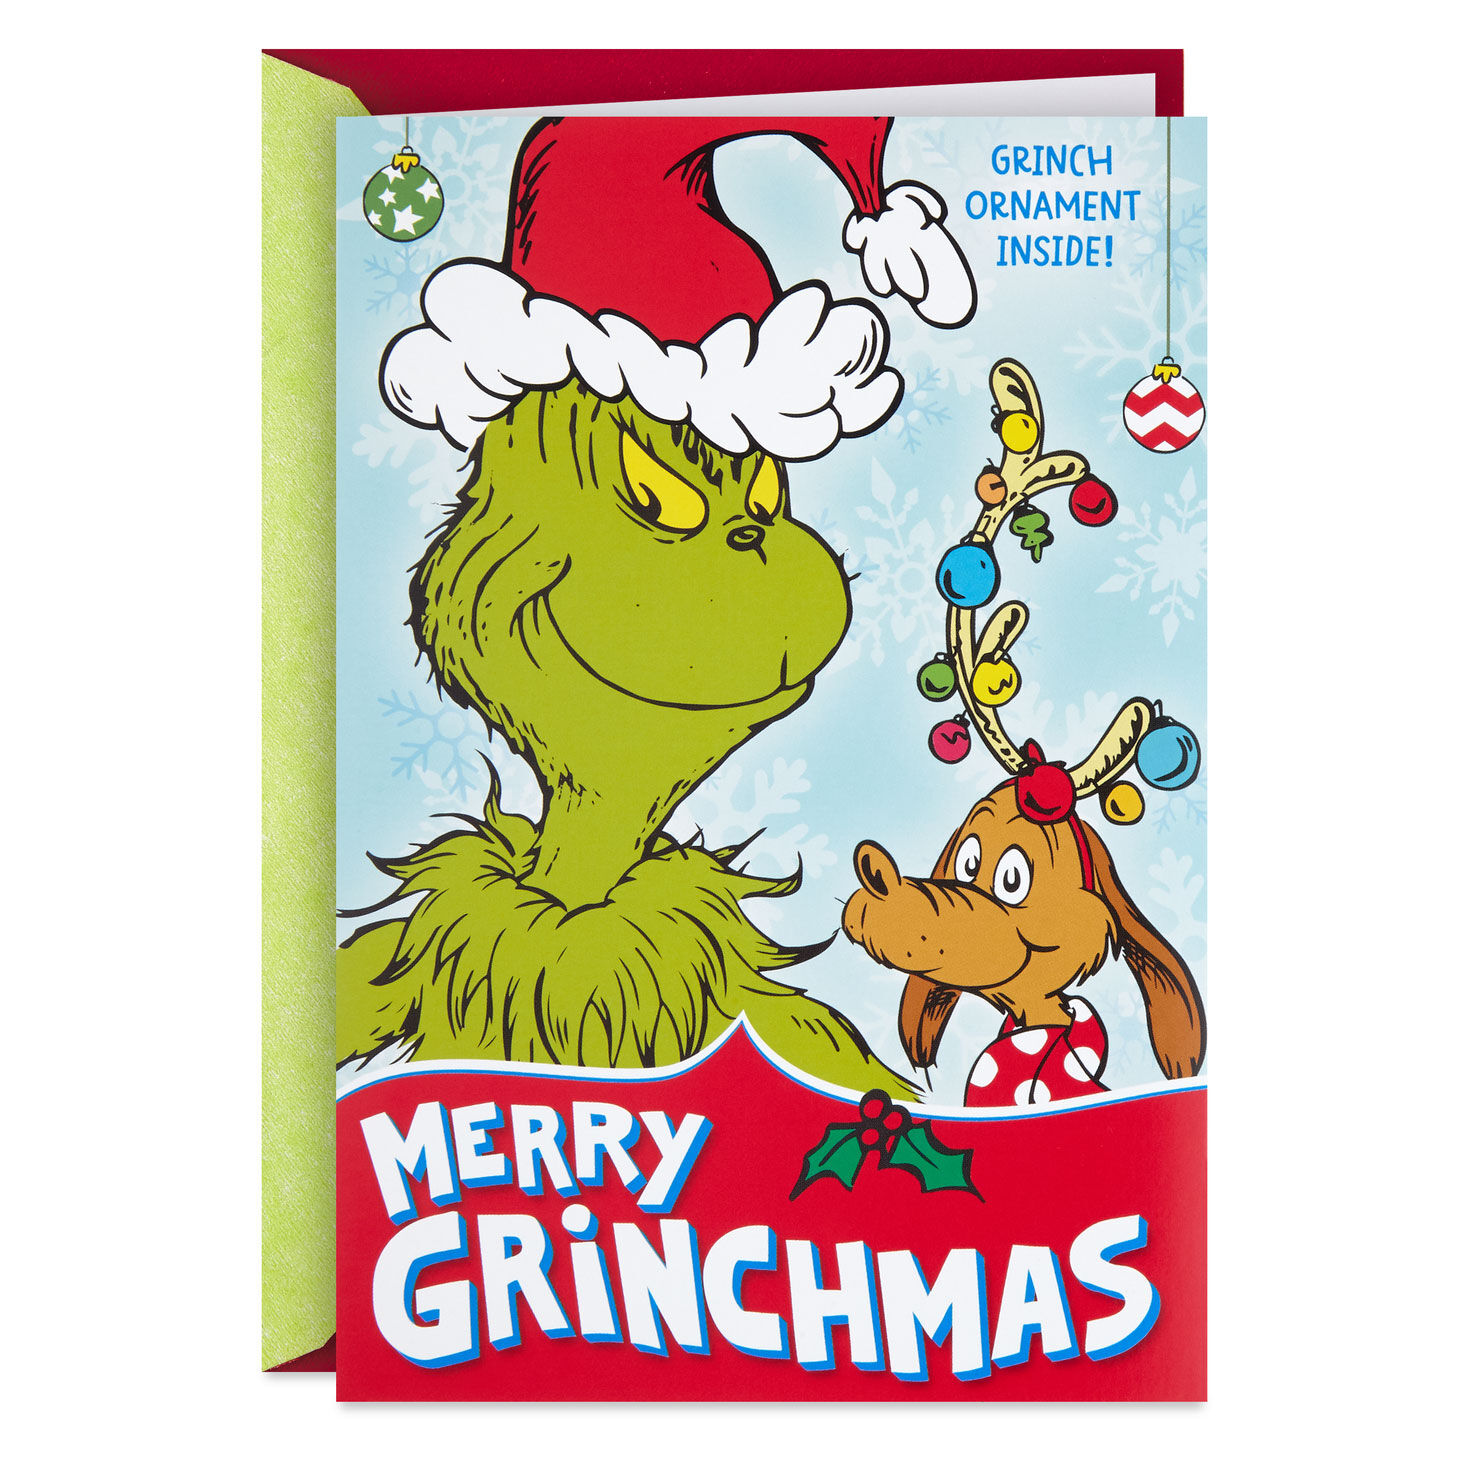 https://www.hallmark.com/dw/image/v2/AALB_PRD/on/demandware.static/-/Sites-hallmark-master/default/dw26f16192/images/finished-goods/products/399XXI4004/Dr.-Seuss-Grinch-Christmas-Card-With-Decoration-for-Kids_399XXI4004_01.jpg?sfrm=jpg